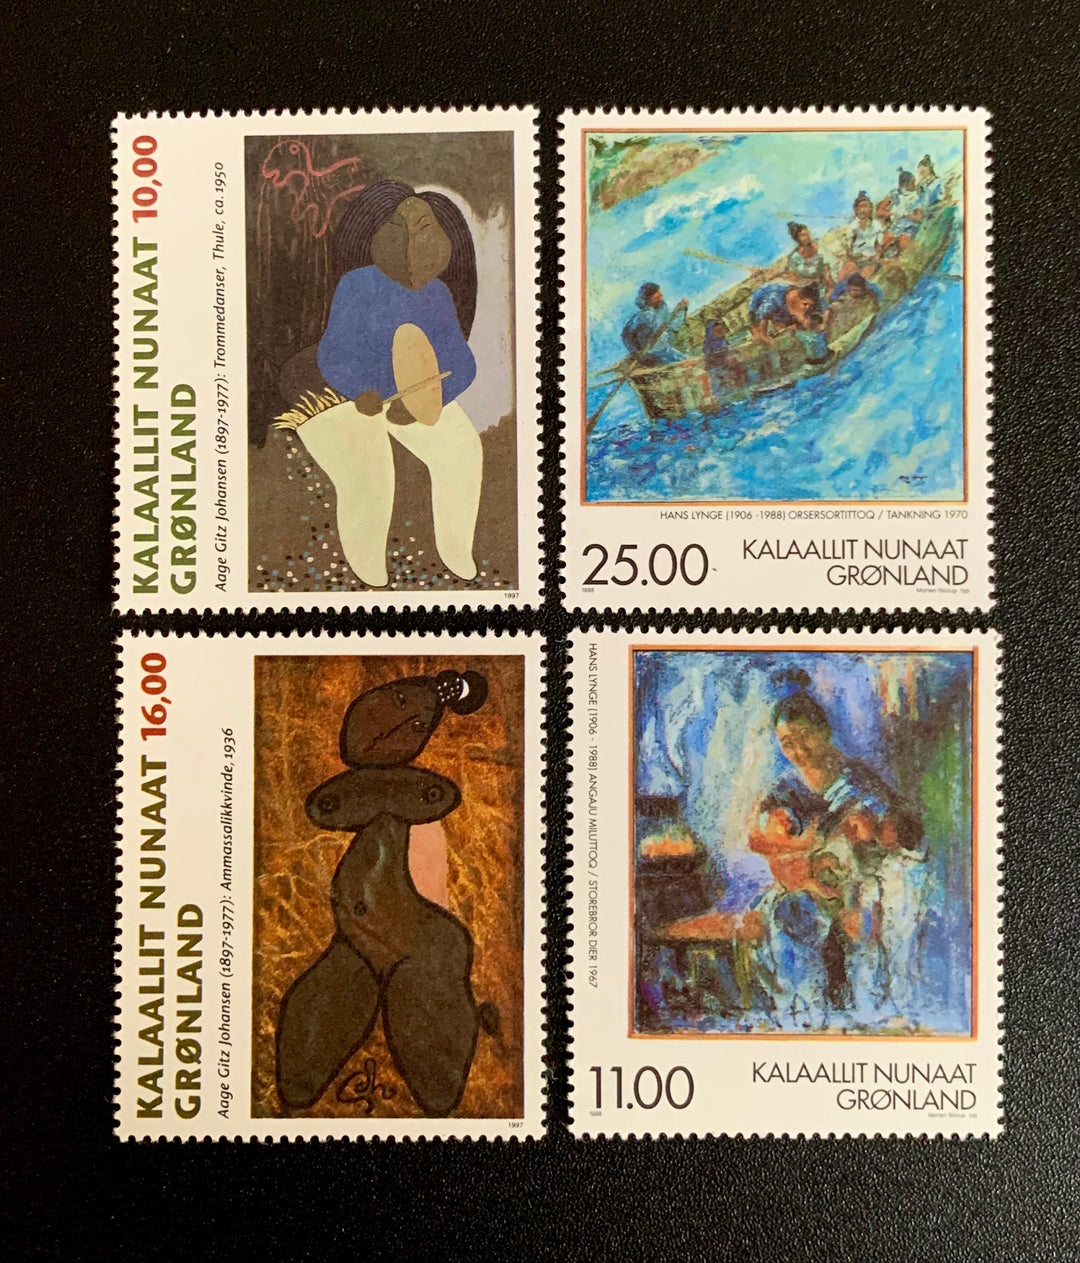 Greenland - Original Vintage Postage Stamps- 1997/98 - Greenland Art - for the collector, artist or crafter